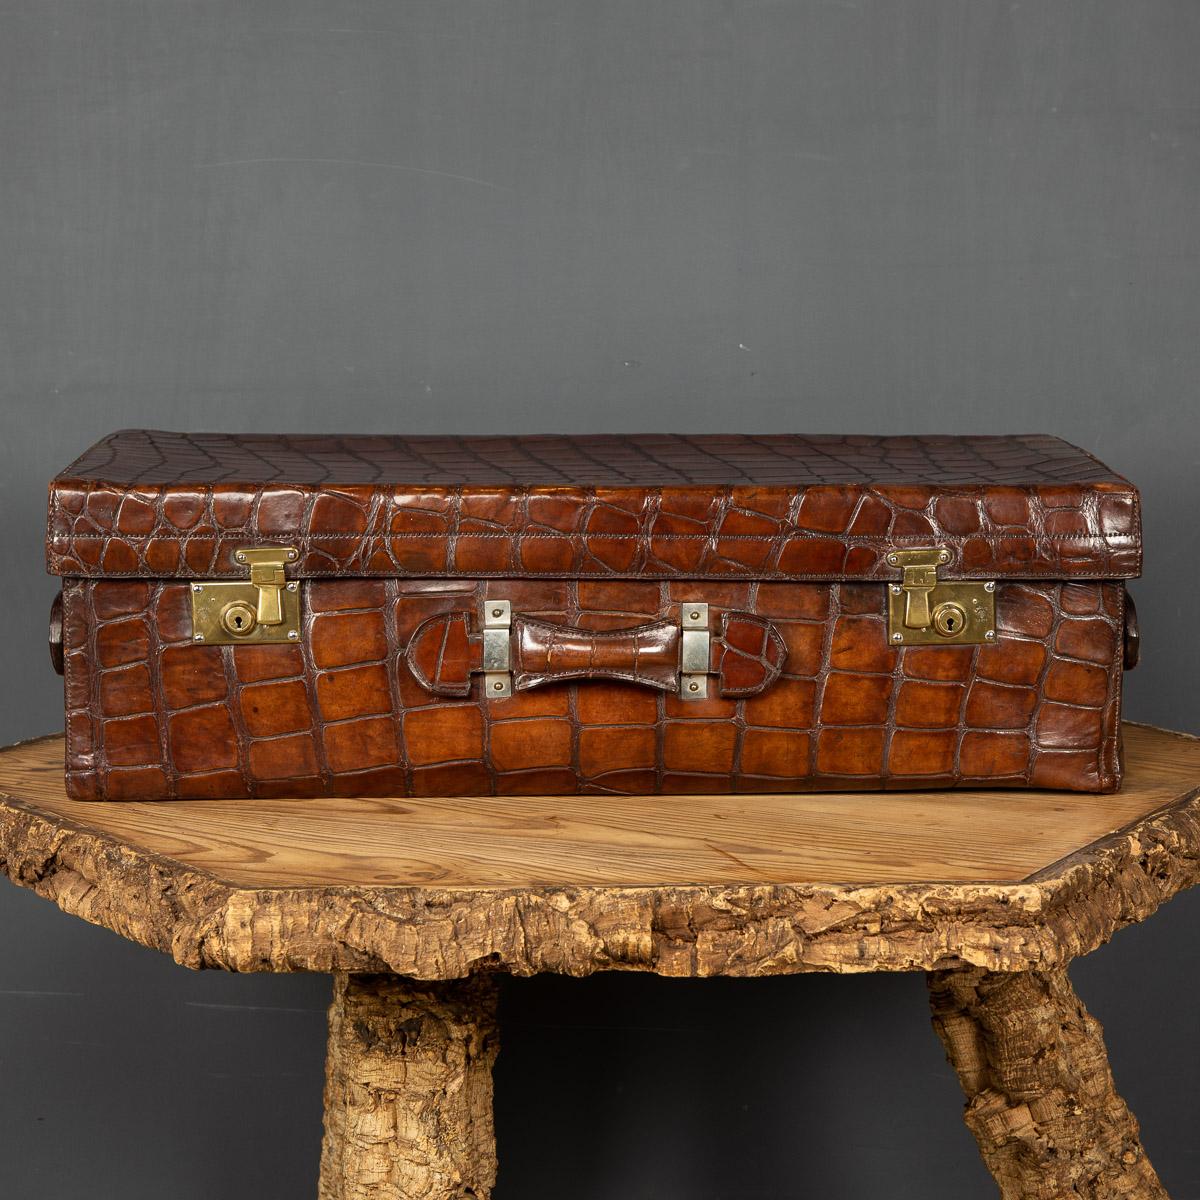 Antique early-20th Century English dark tan crocodile leather suit case. This case has been relined in navy suede. The case is oozing style and elegance, this case makes for a fantastic conversation piece, a very practical item suitable for any